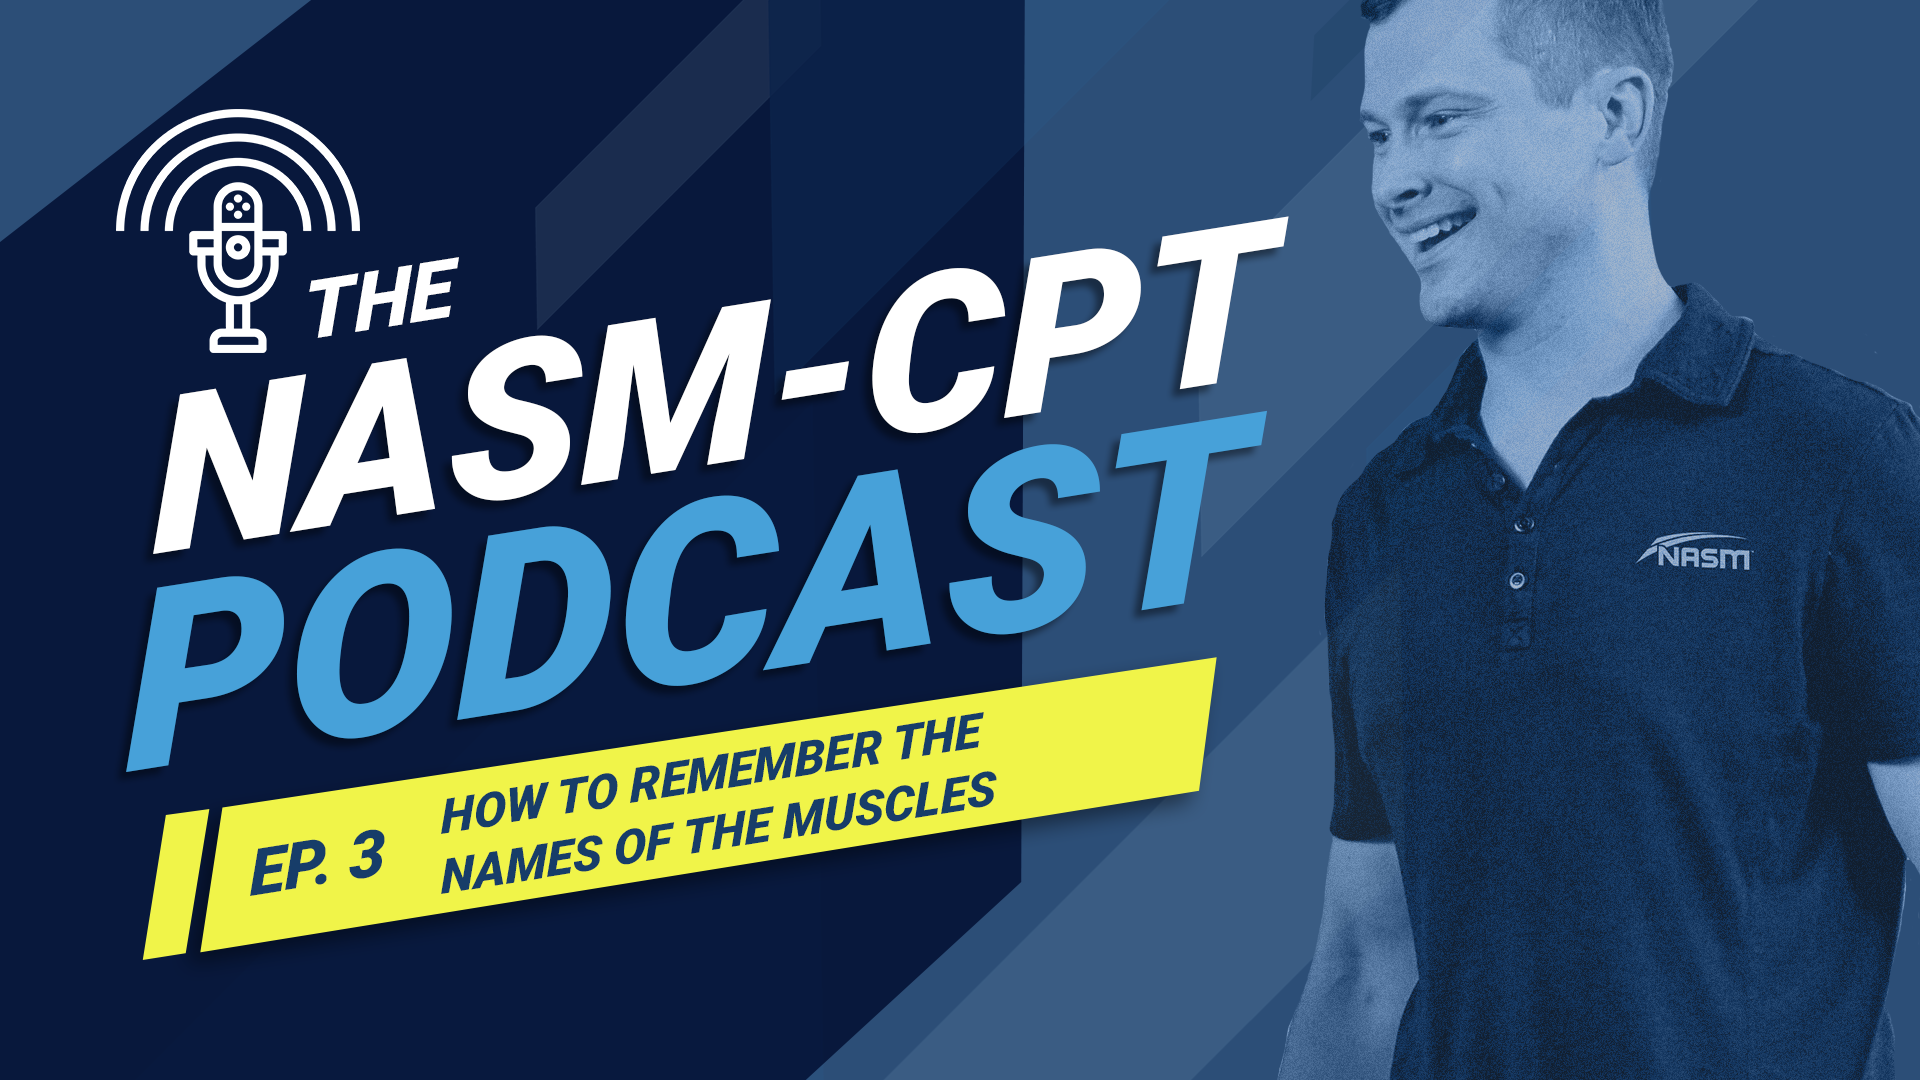 The Nasm Cpt Podcast Remember Names Of Muscles